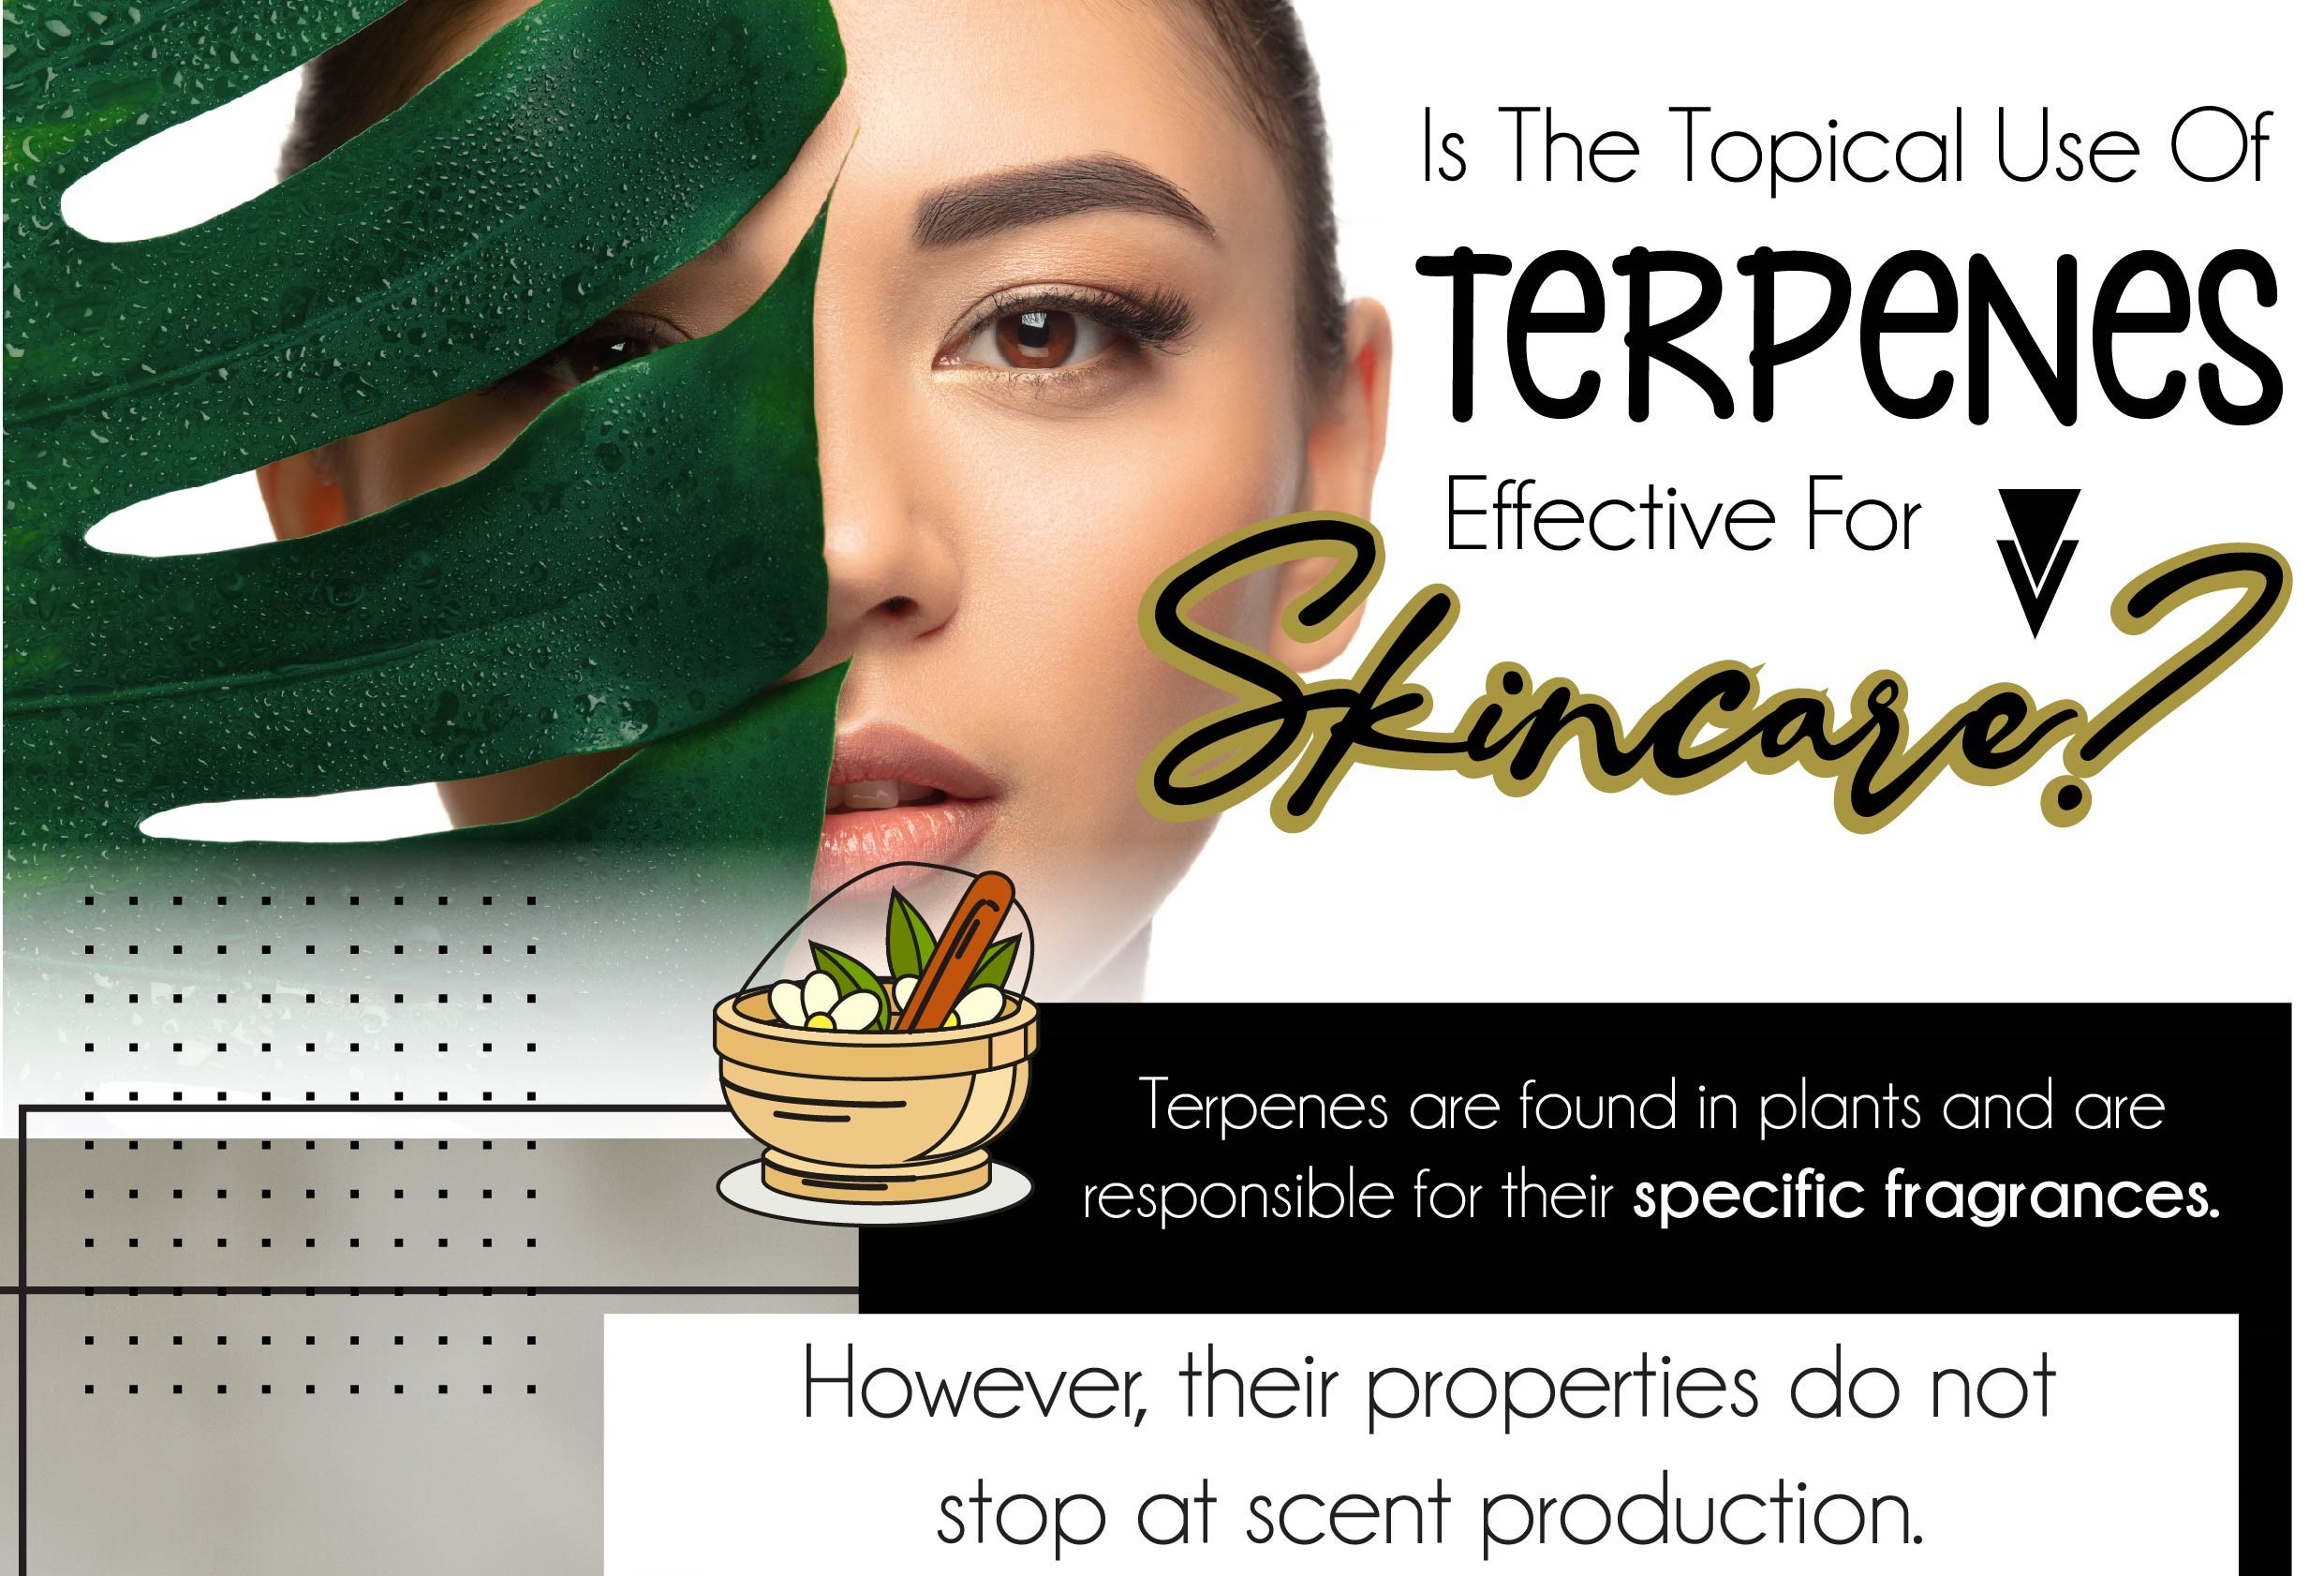 Is the topical use of terpenes effective for skincare